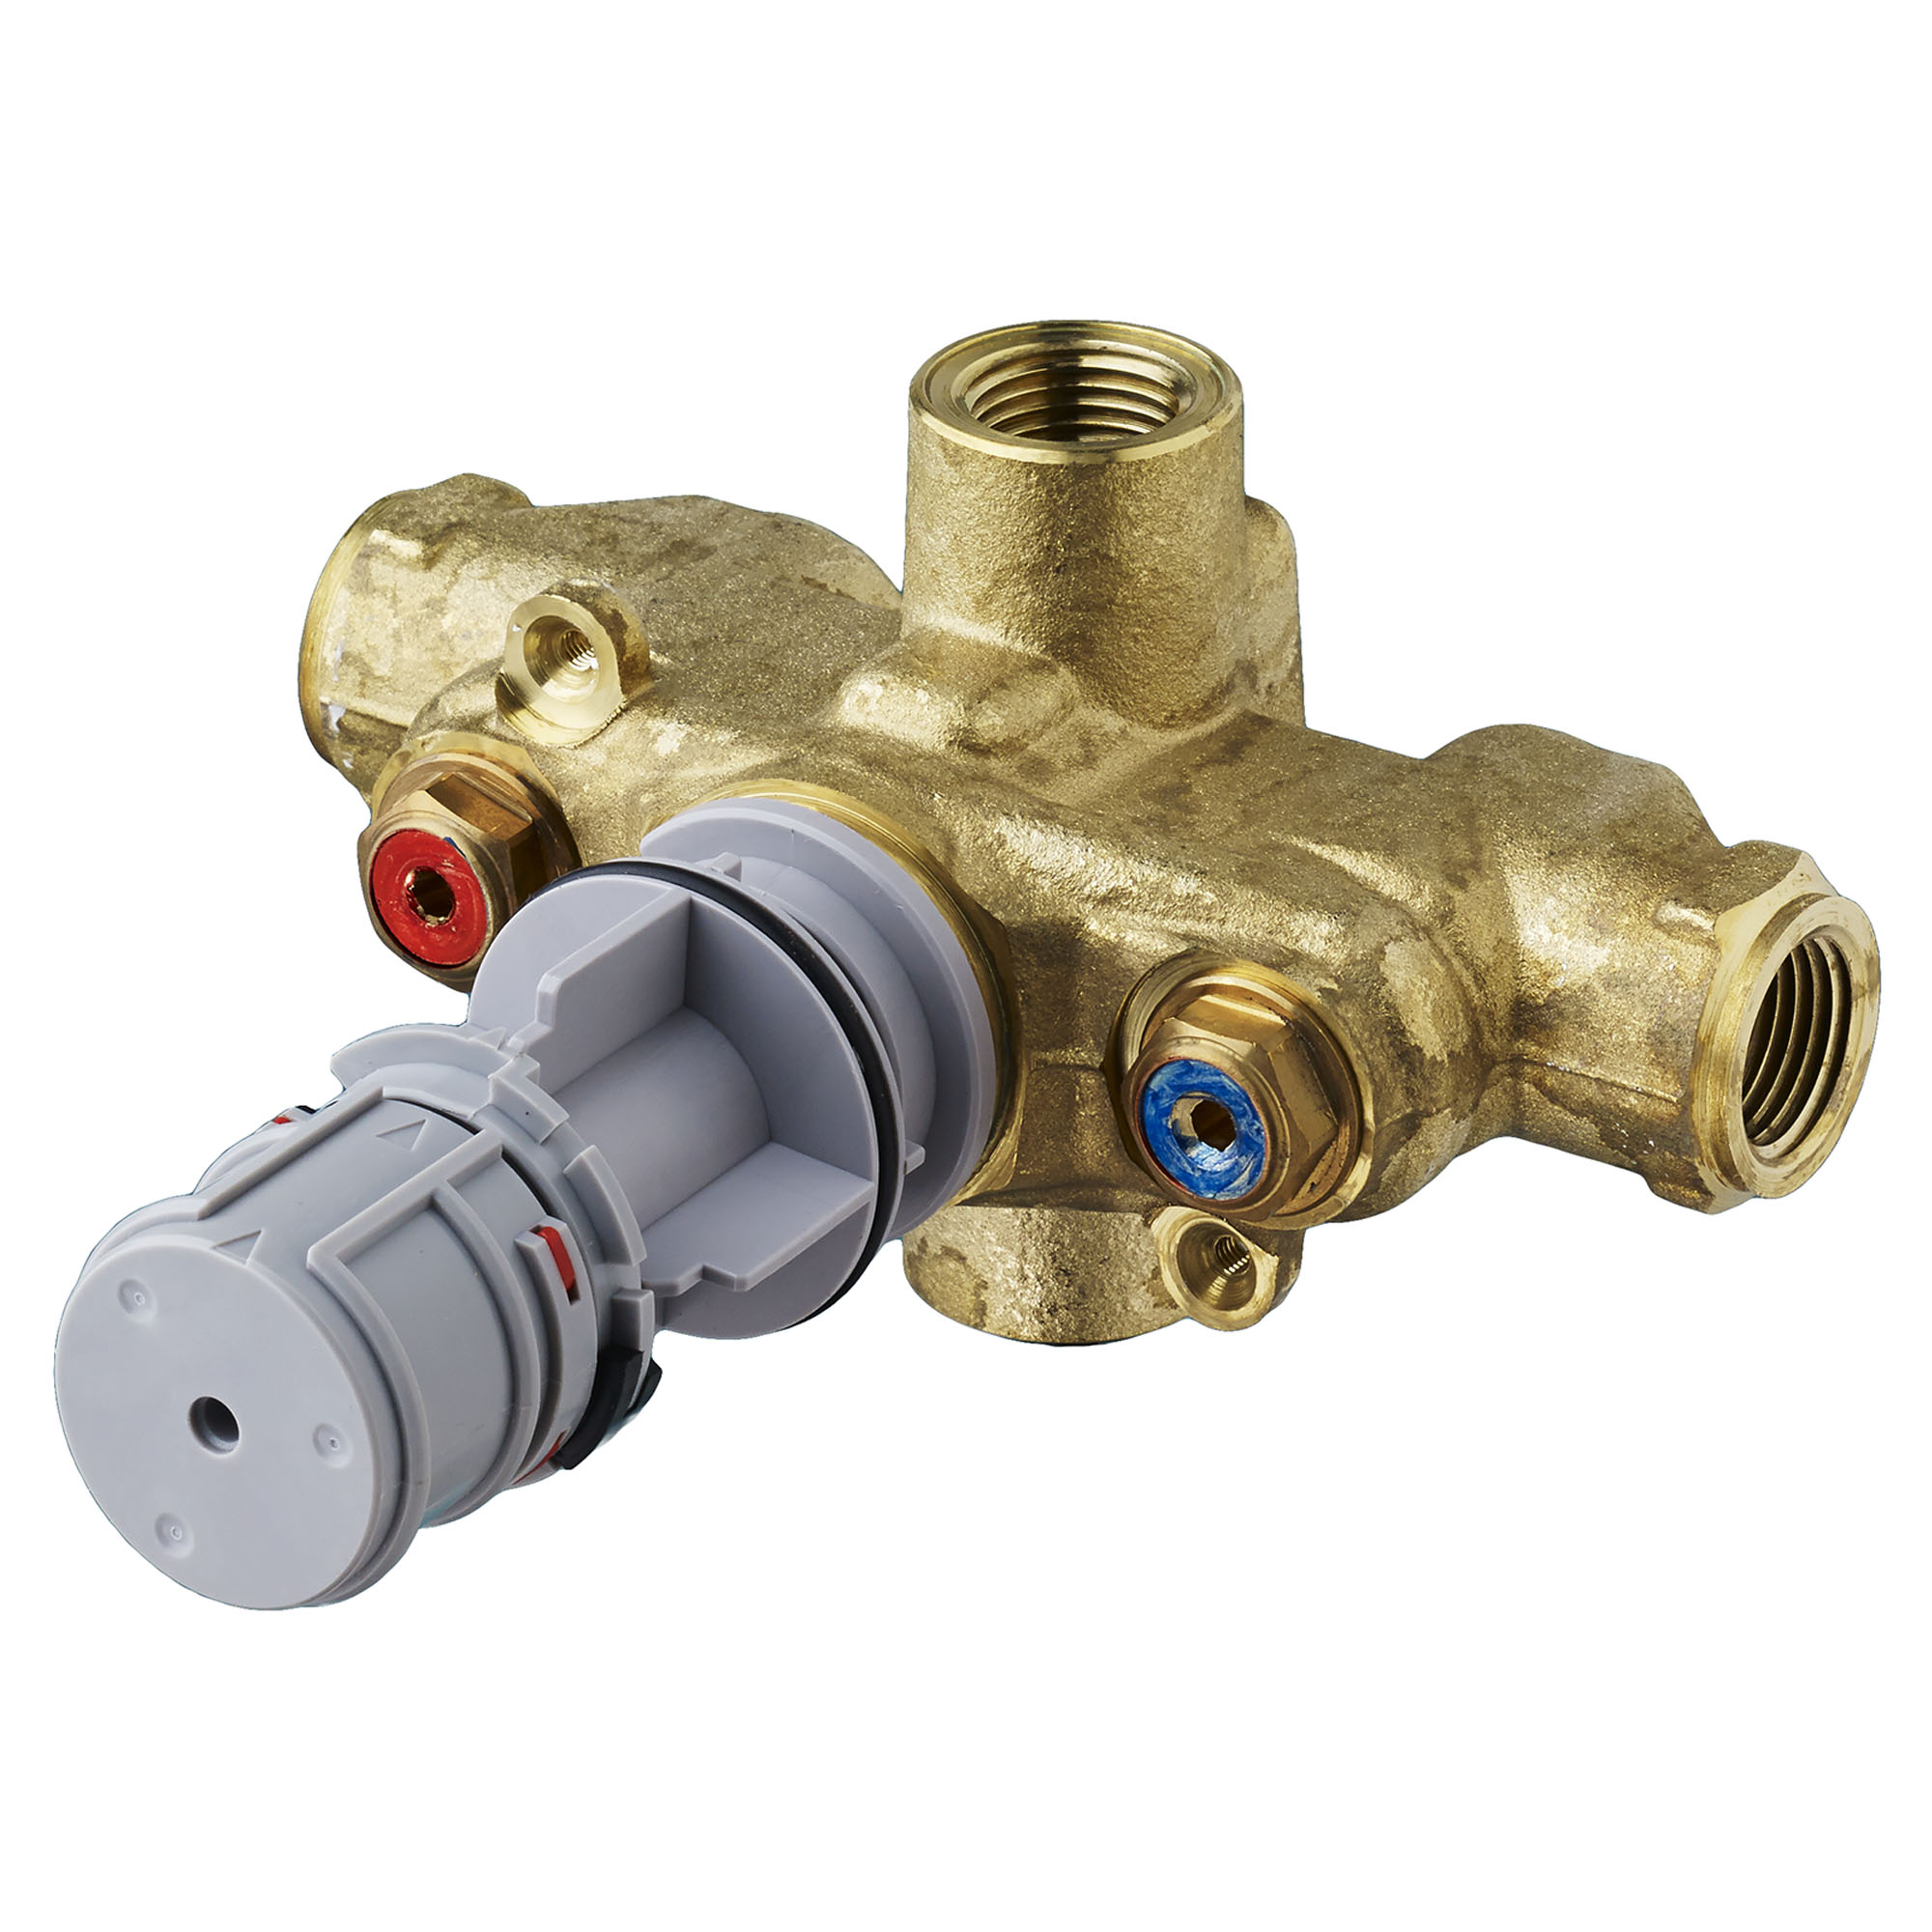 1/2 Inch Thermostatic Wall Rough Valve